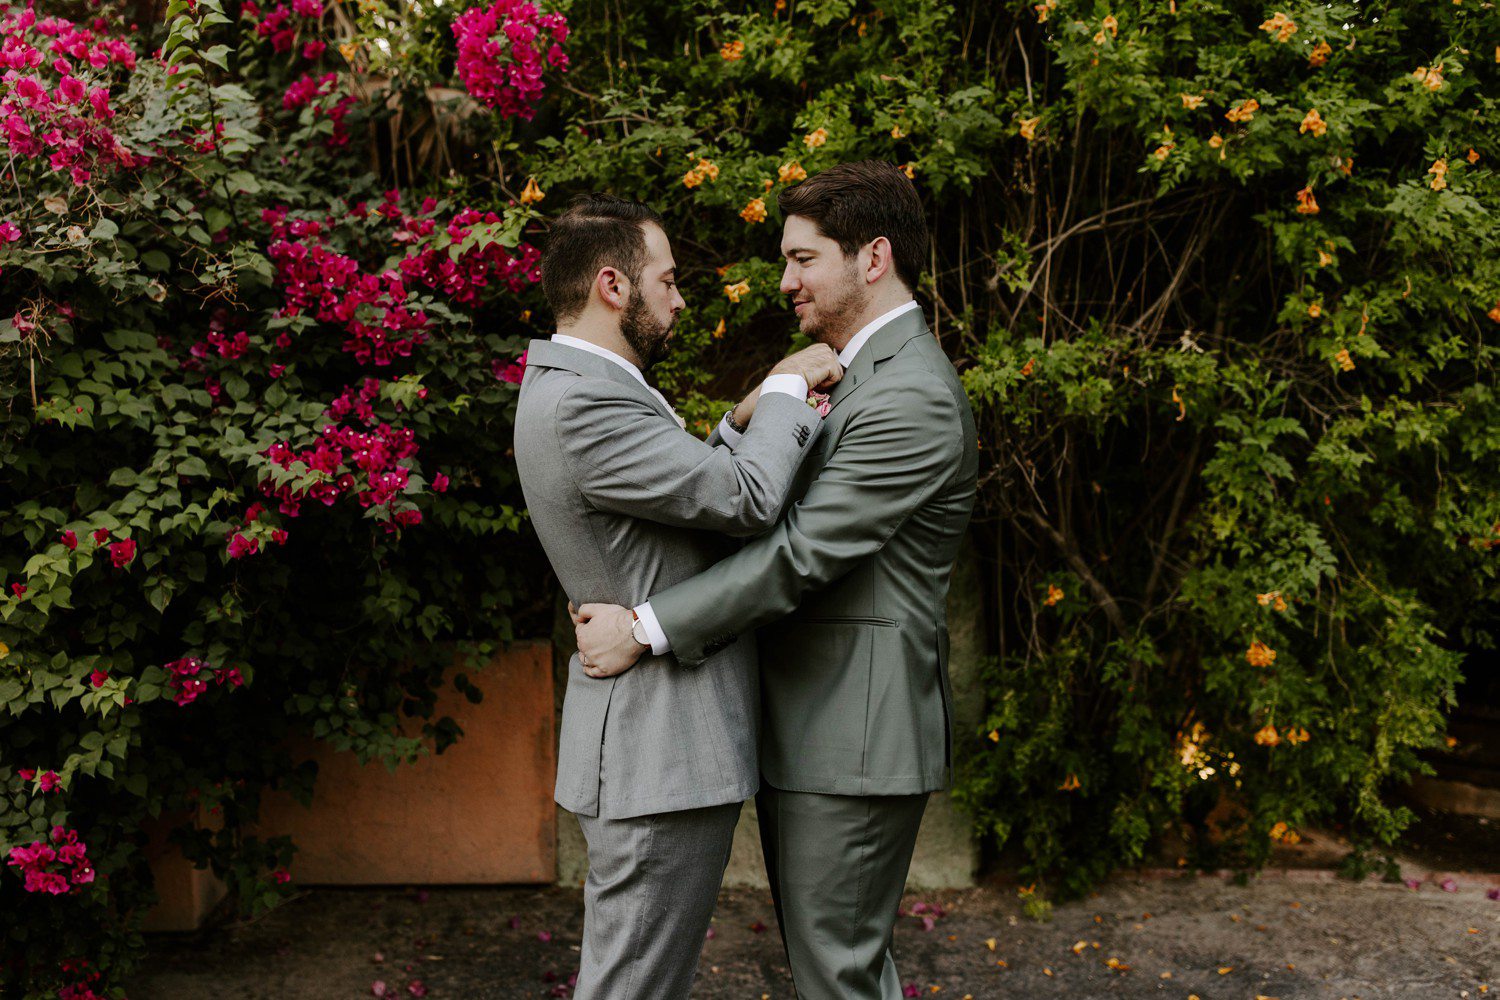 Two Grooms wedding photos in Phoenix at Boojum Tree.